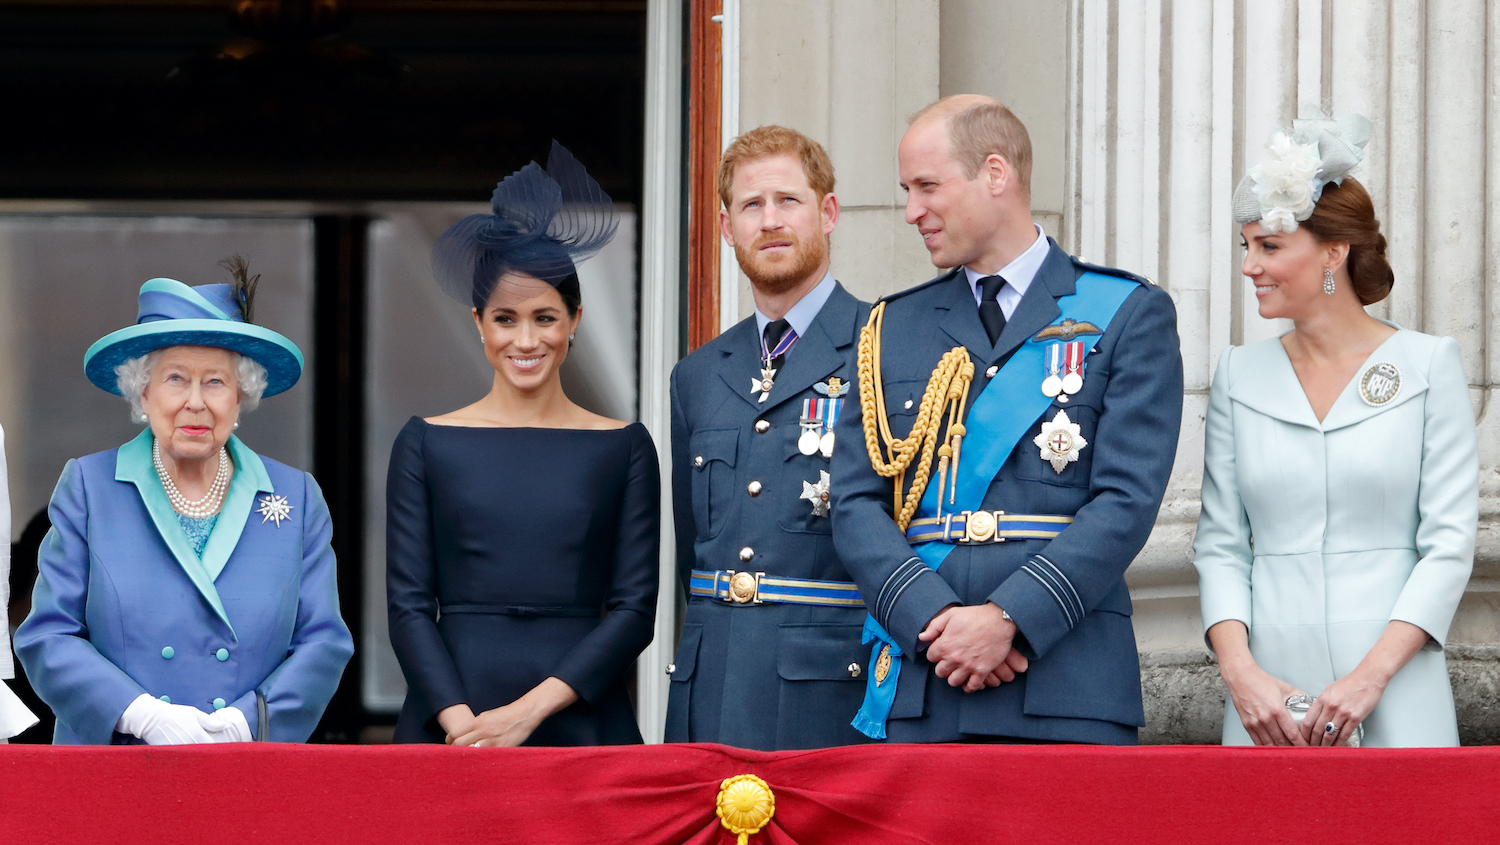 Queen Elizabeth II, Meghan Markle, Prince Harry, Prince William, and Kate Middleton watch a flypast to mark the centenary of the Royal Air Force from the balcony of Buckingham Palace